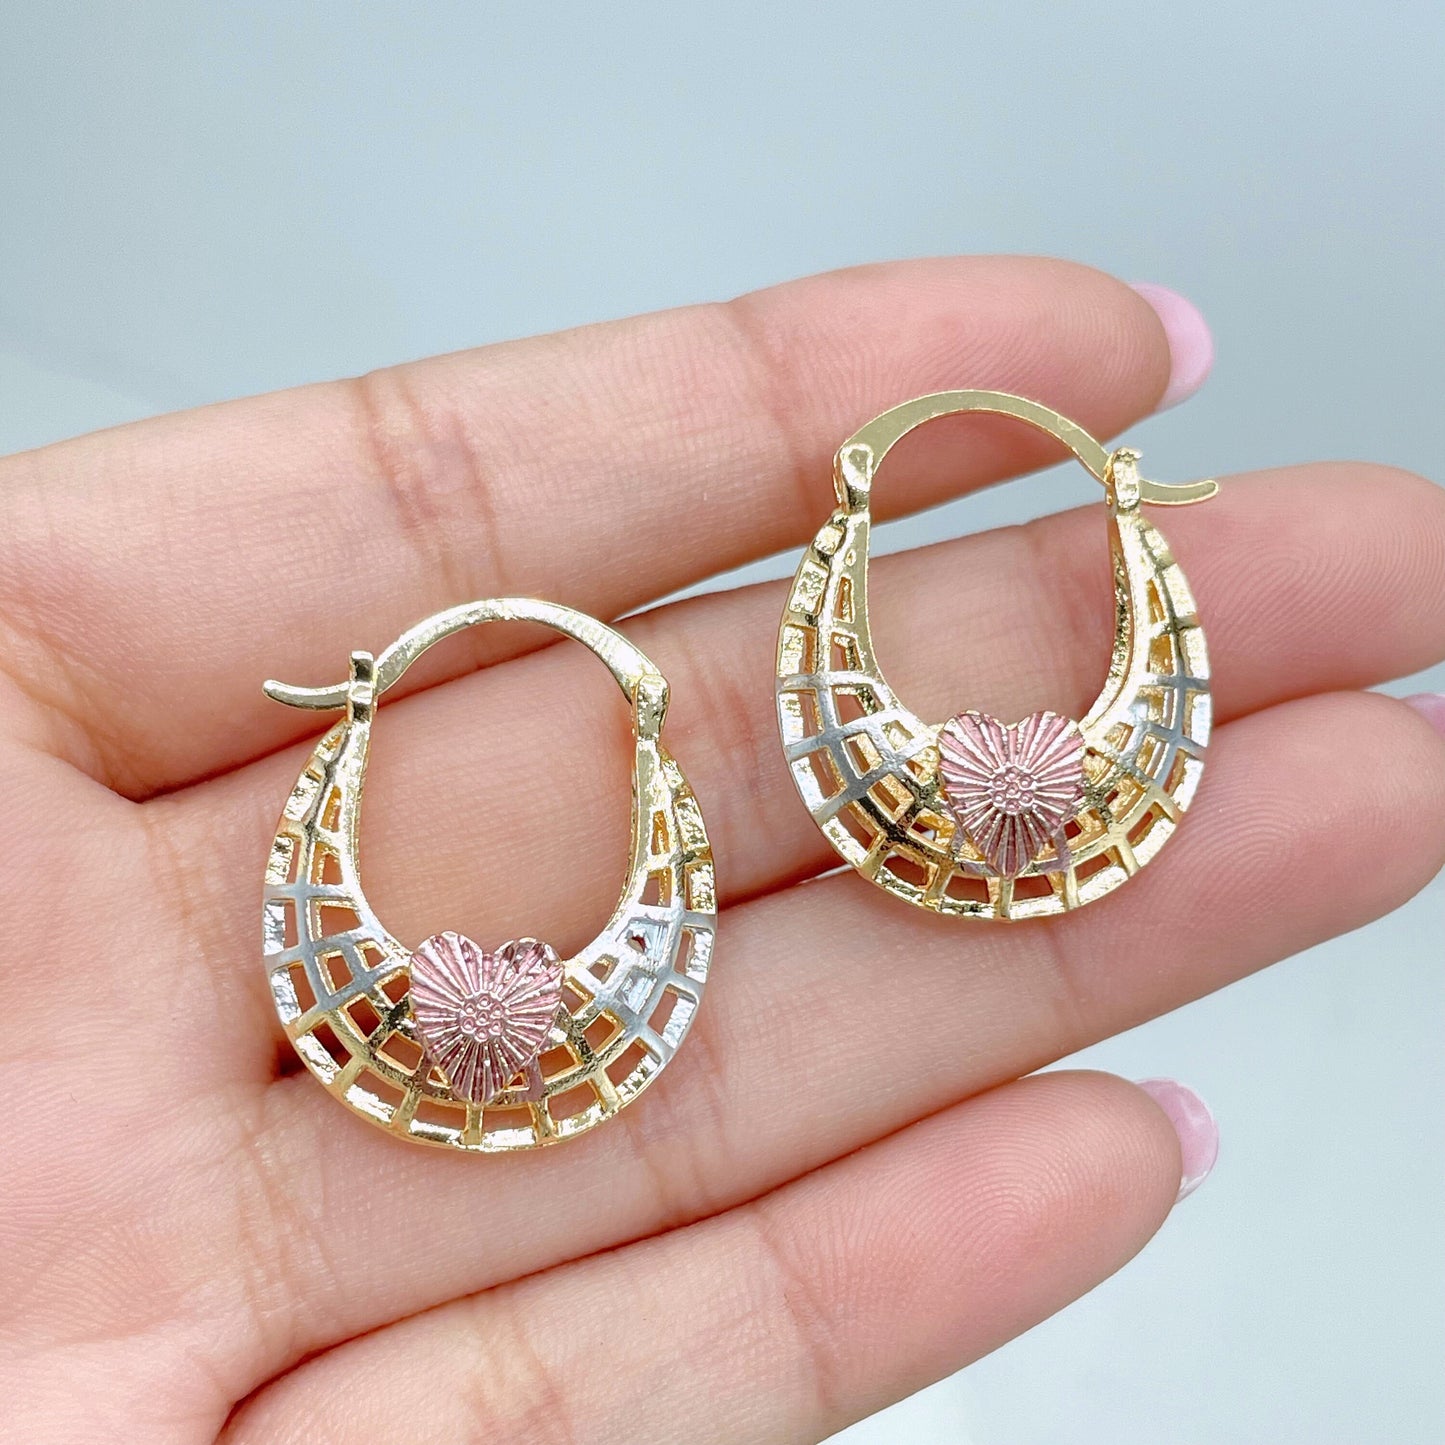 18k Gold Filled, Three Color 21mm Basket Earrings, 6mm Thickness, Wholesale Jewelry Making Supplies